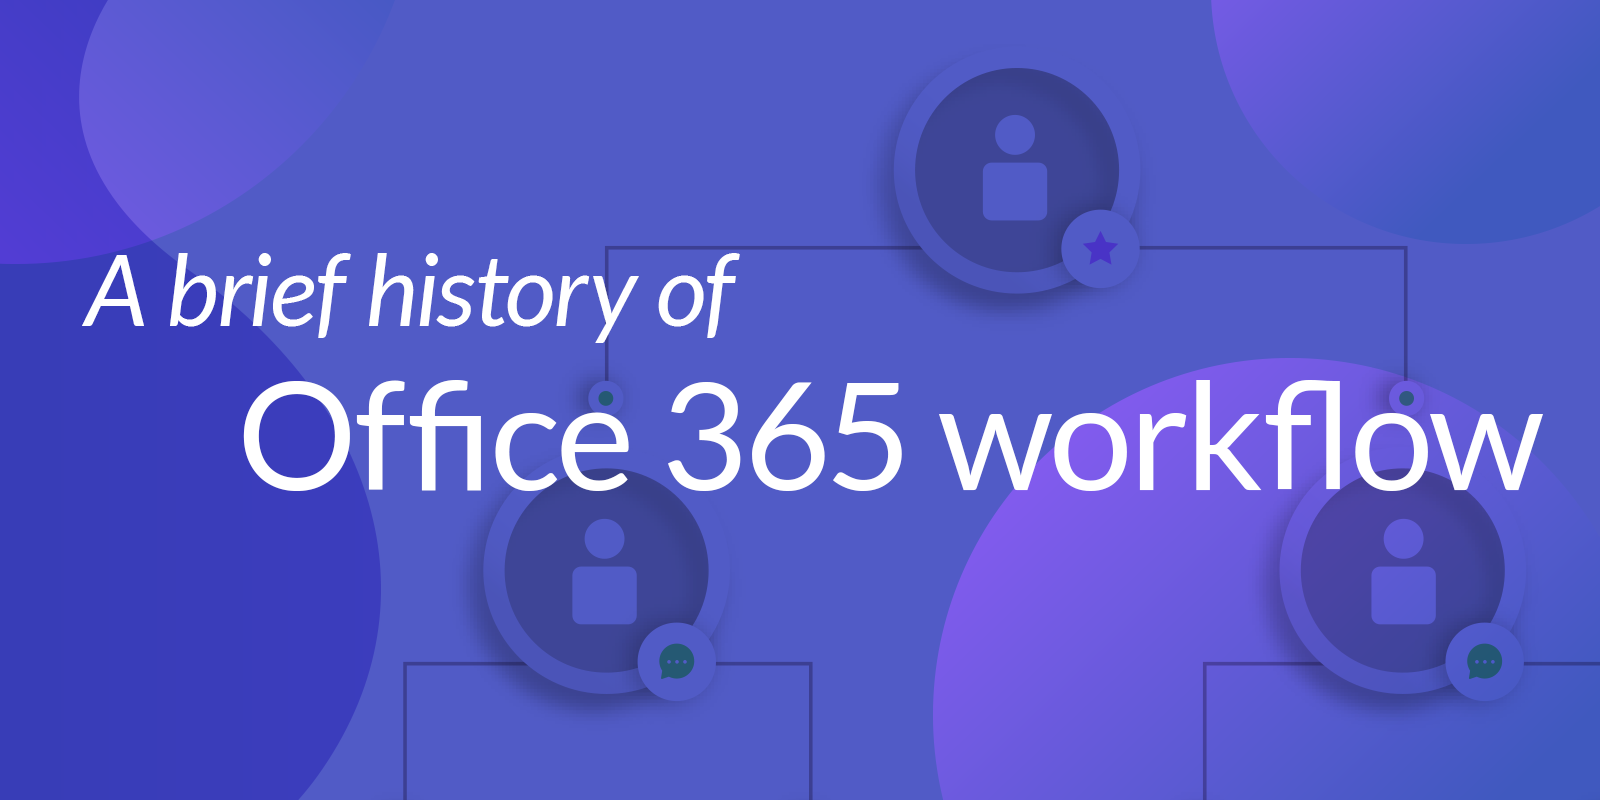 A brief history of Office 365 workflow